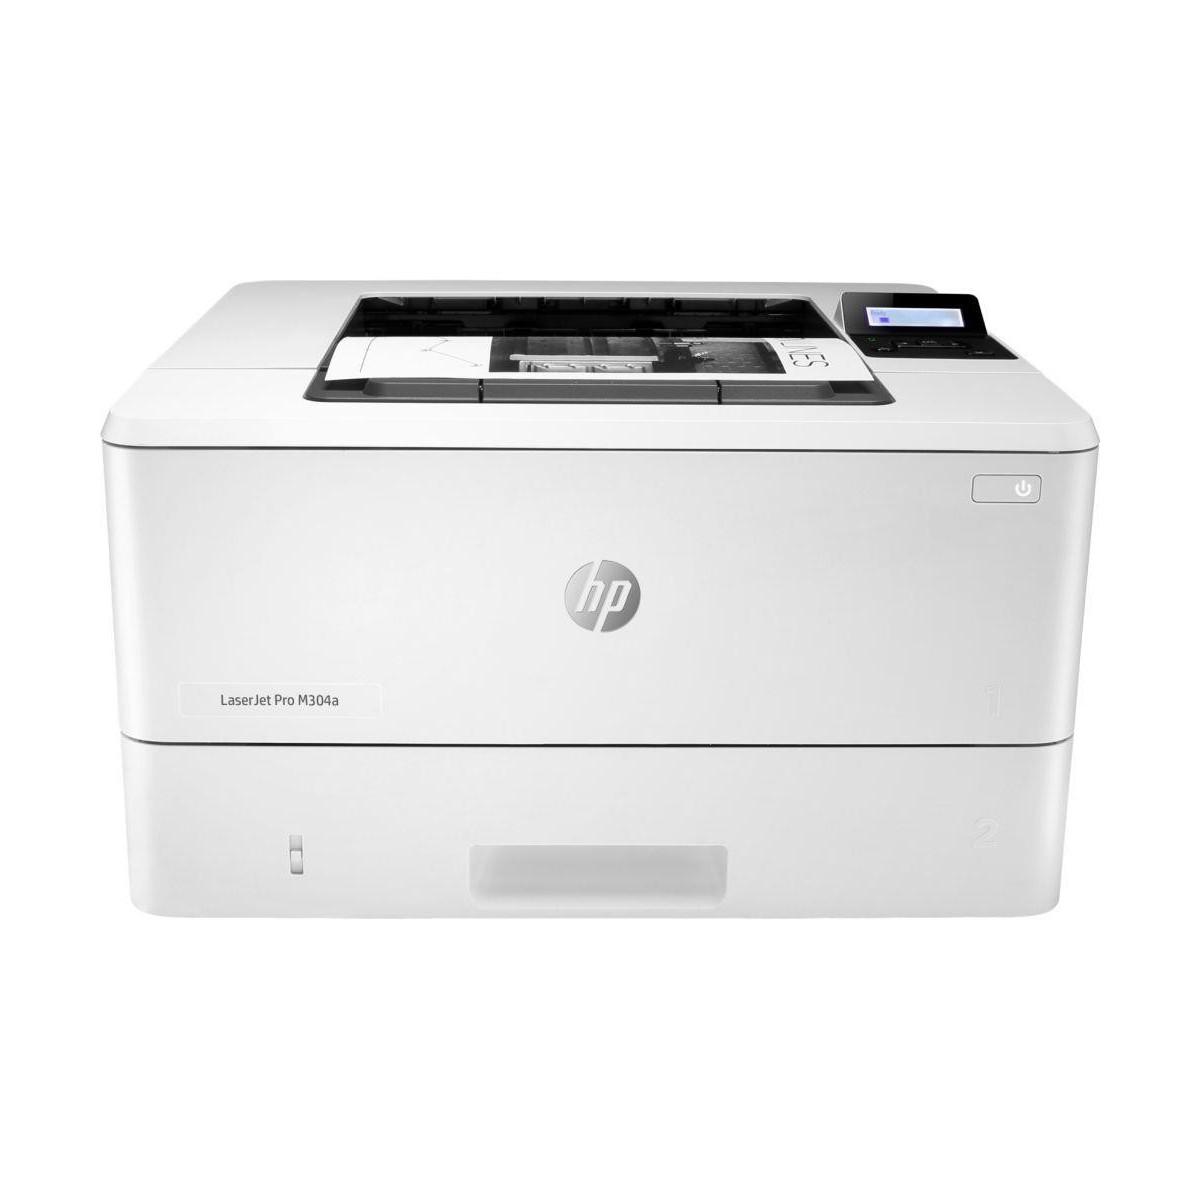 HP LaserJet Pro M304a - Print - Fast first page out speeds Compact Size Energy Efficient - Laser - 1200 x 1200 DPI - A4 - 35 ppm